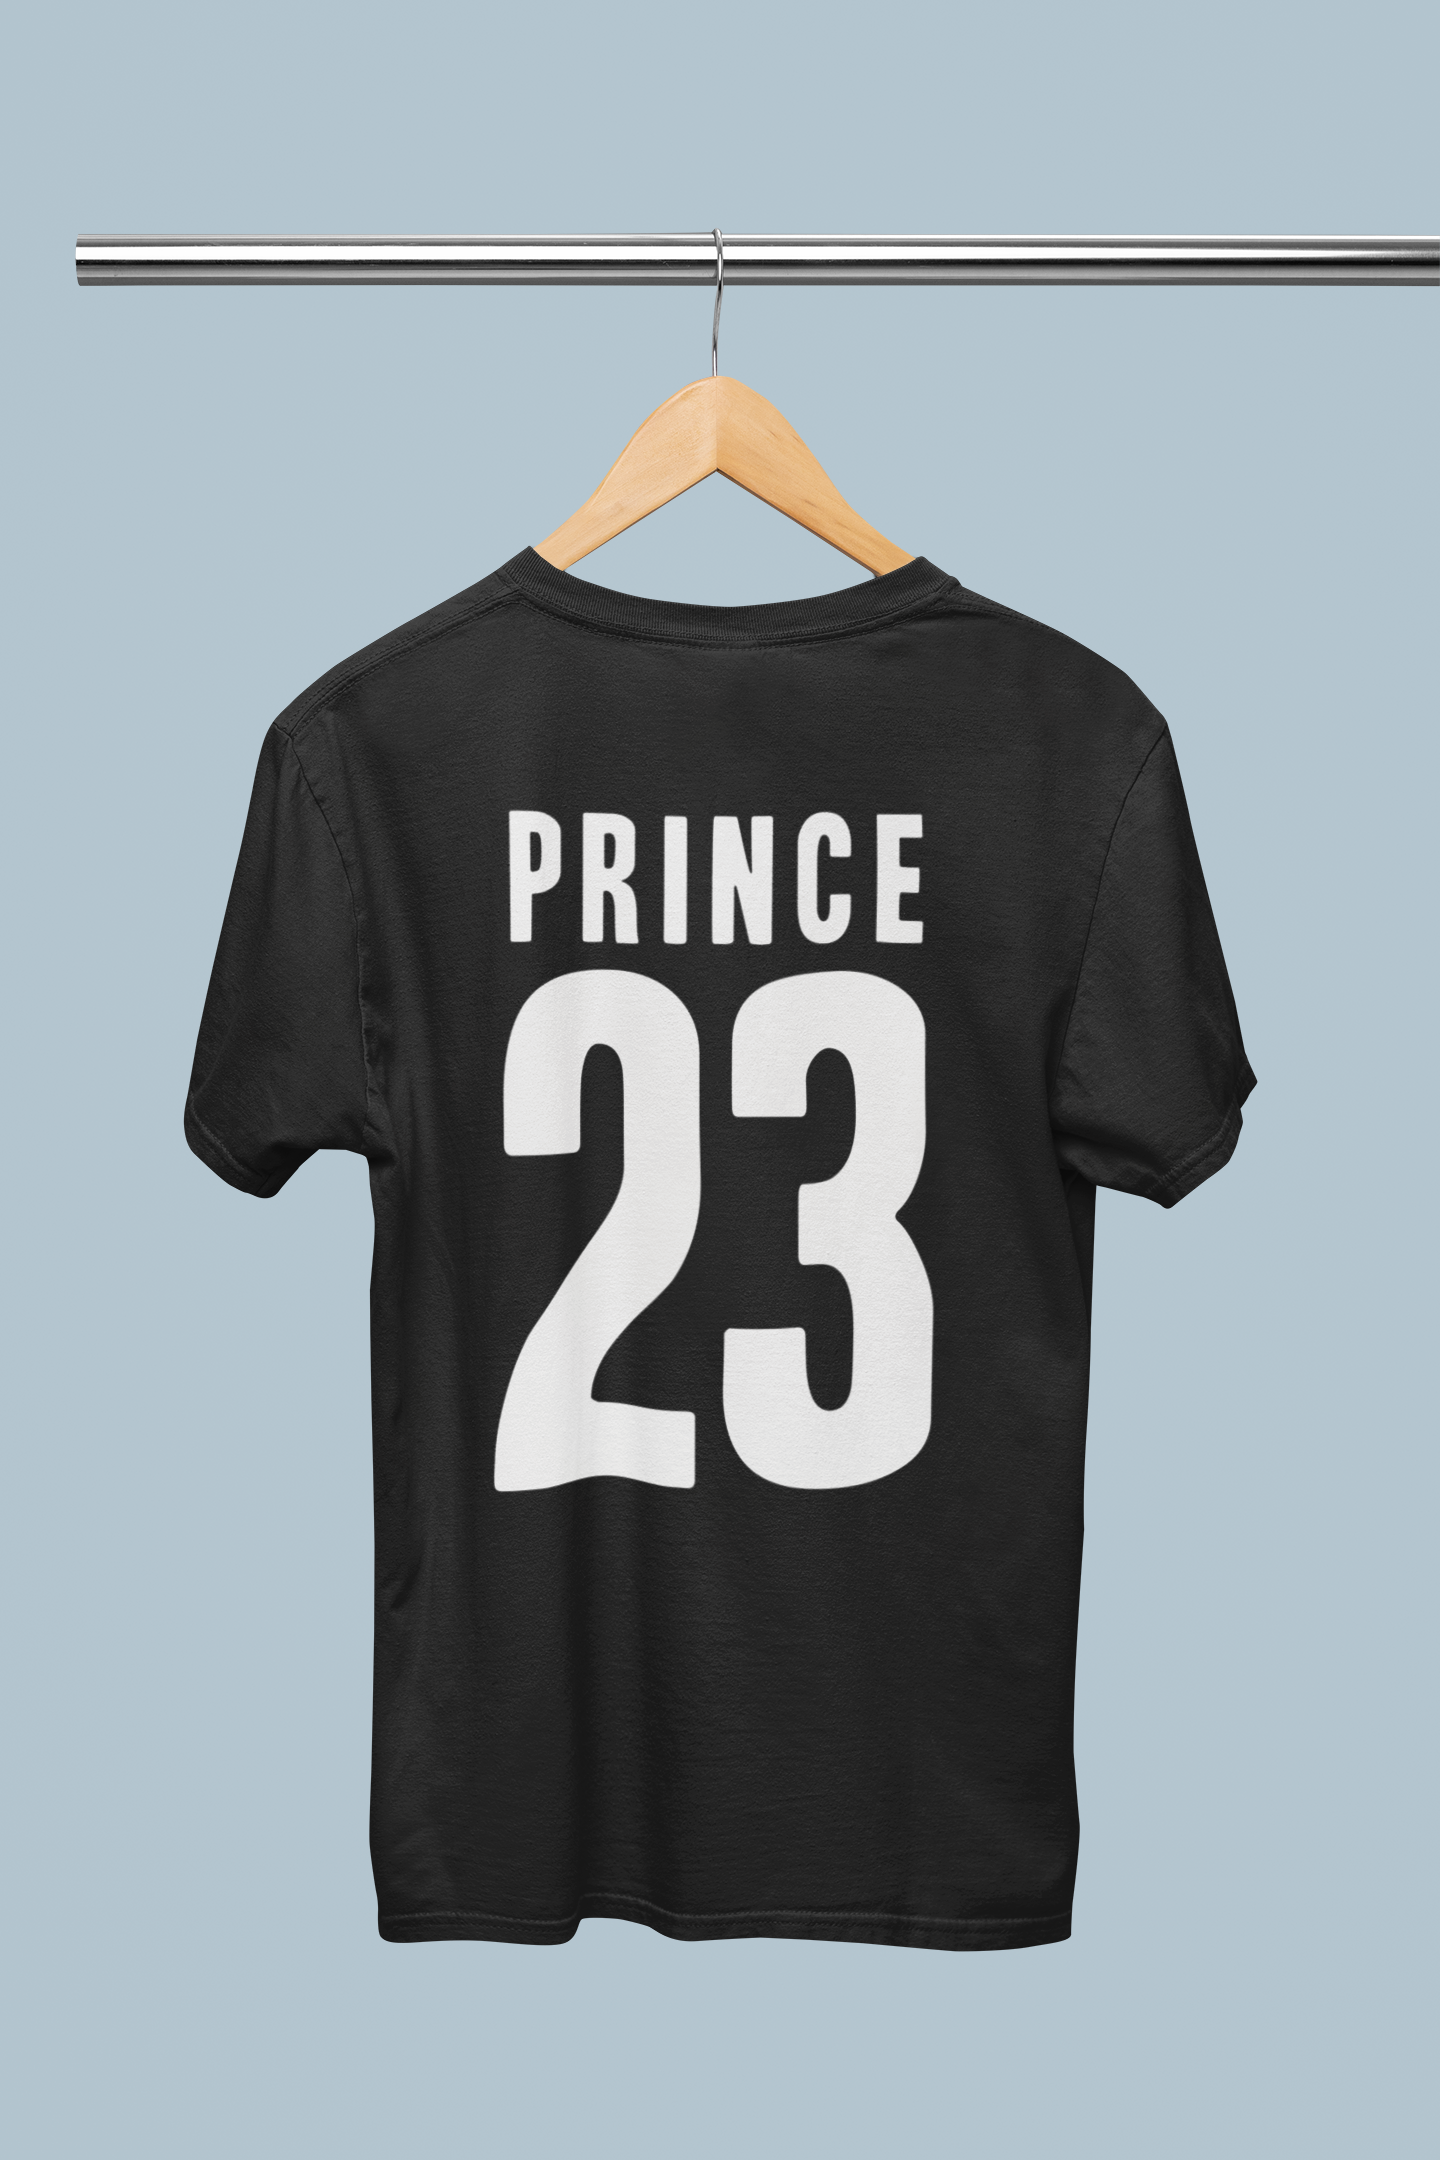 Design your own t-shirt with your own names and numbers King 01 Queen 01 couple shirts